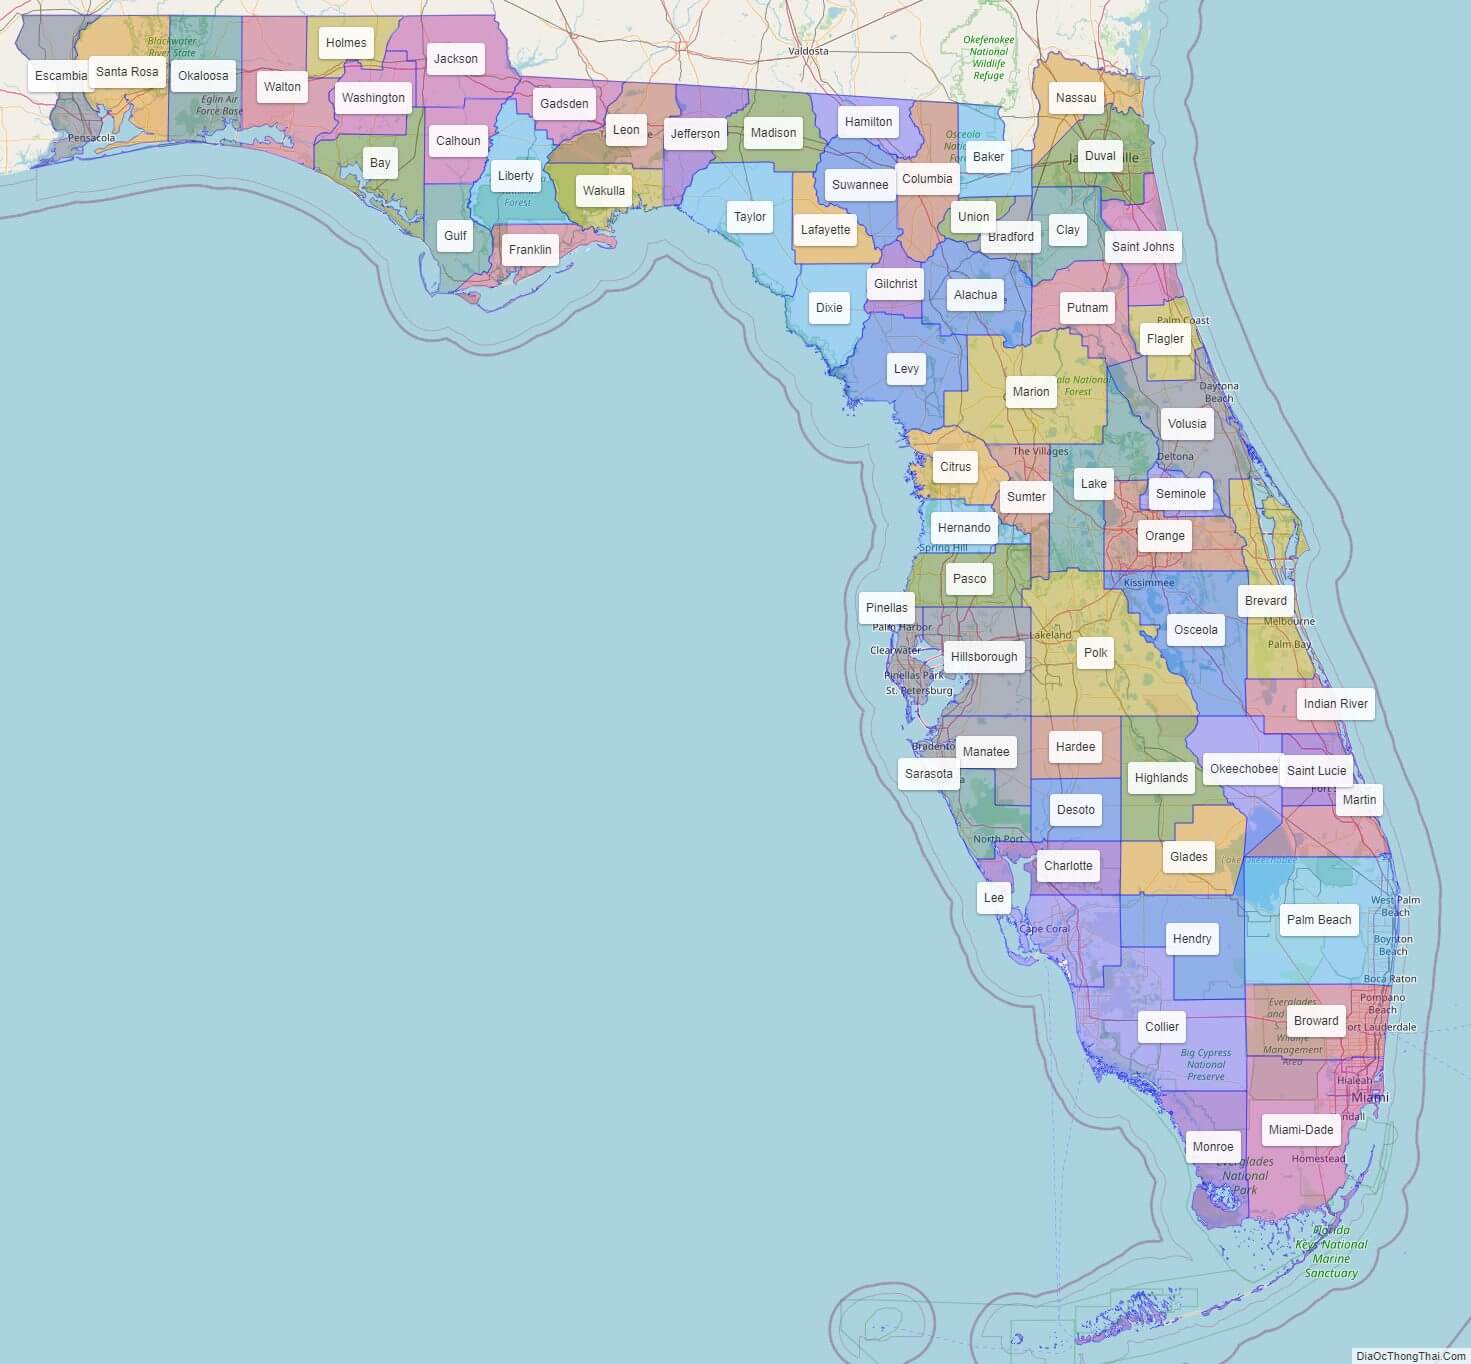 Florida County Map with County Names